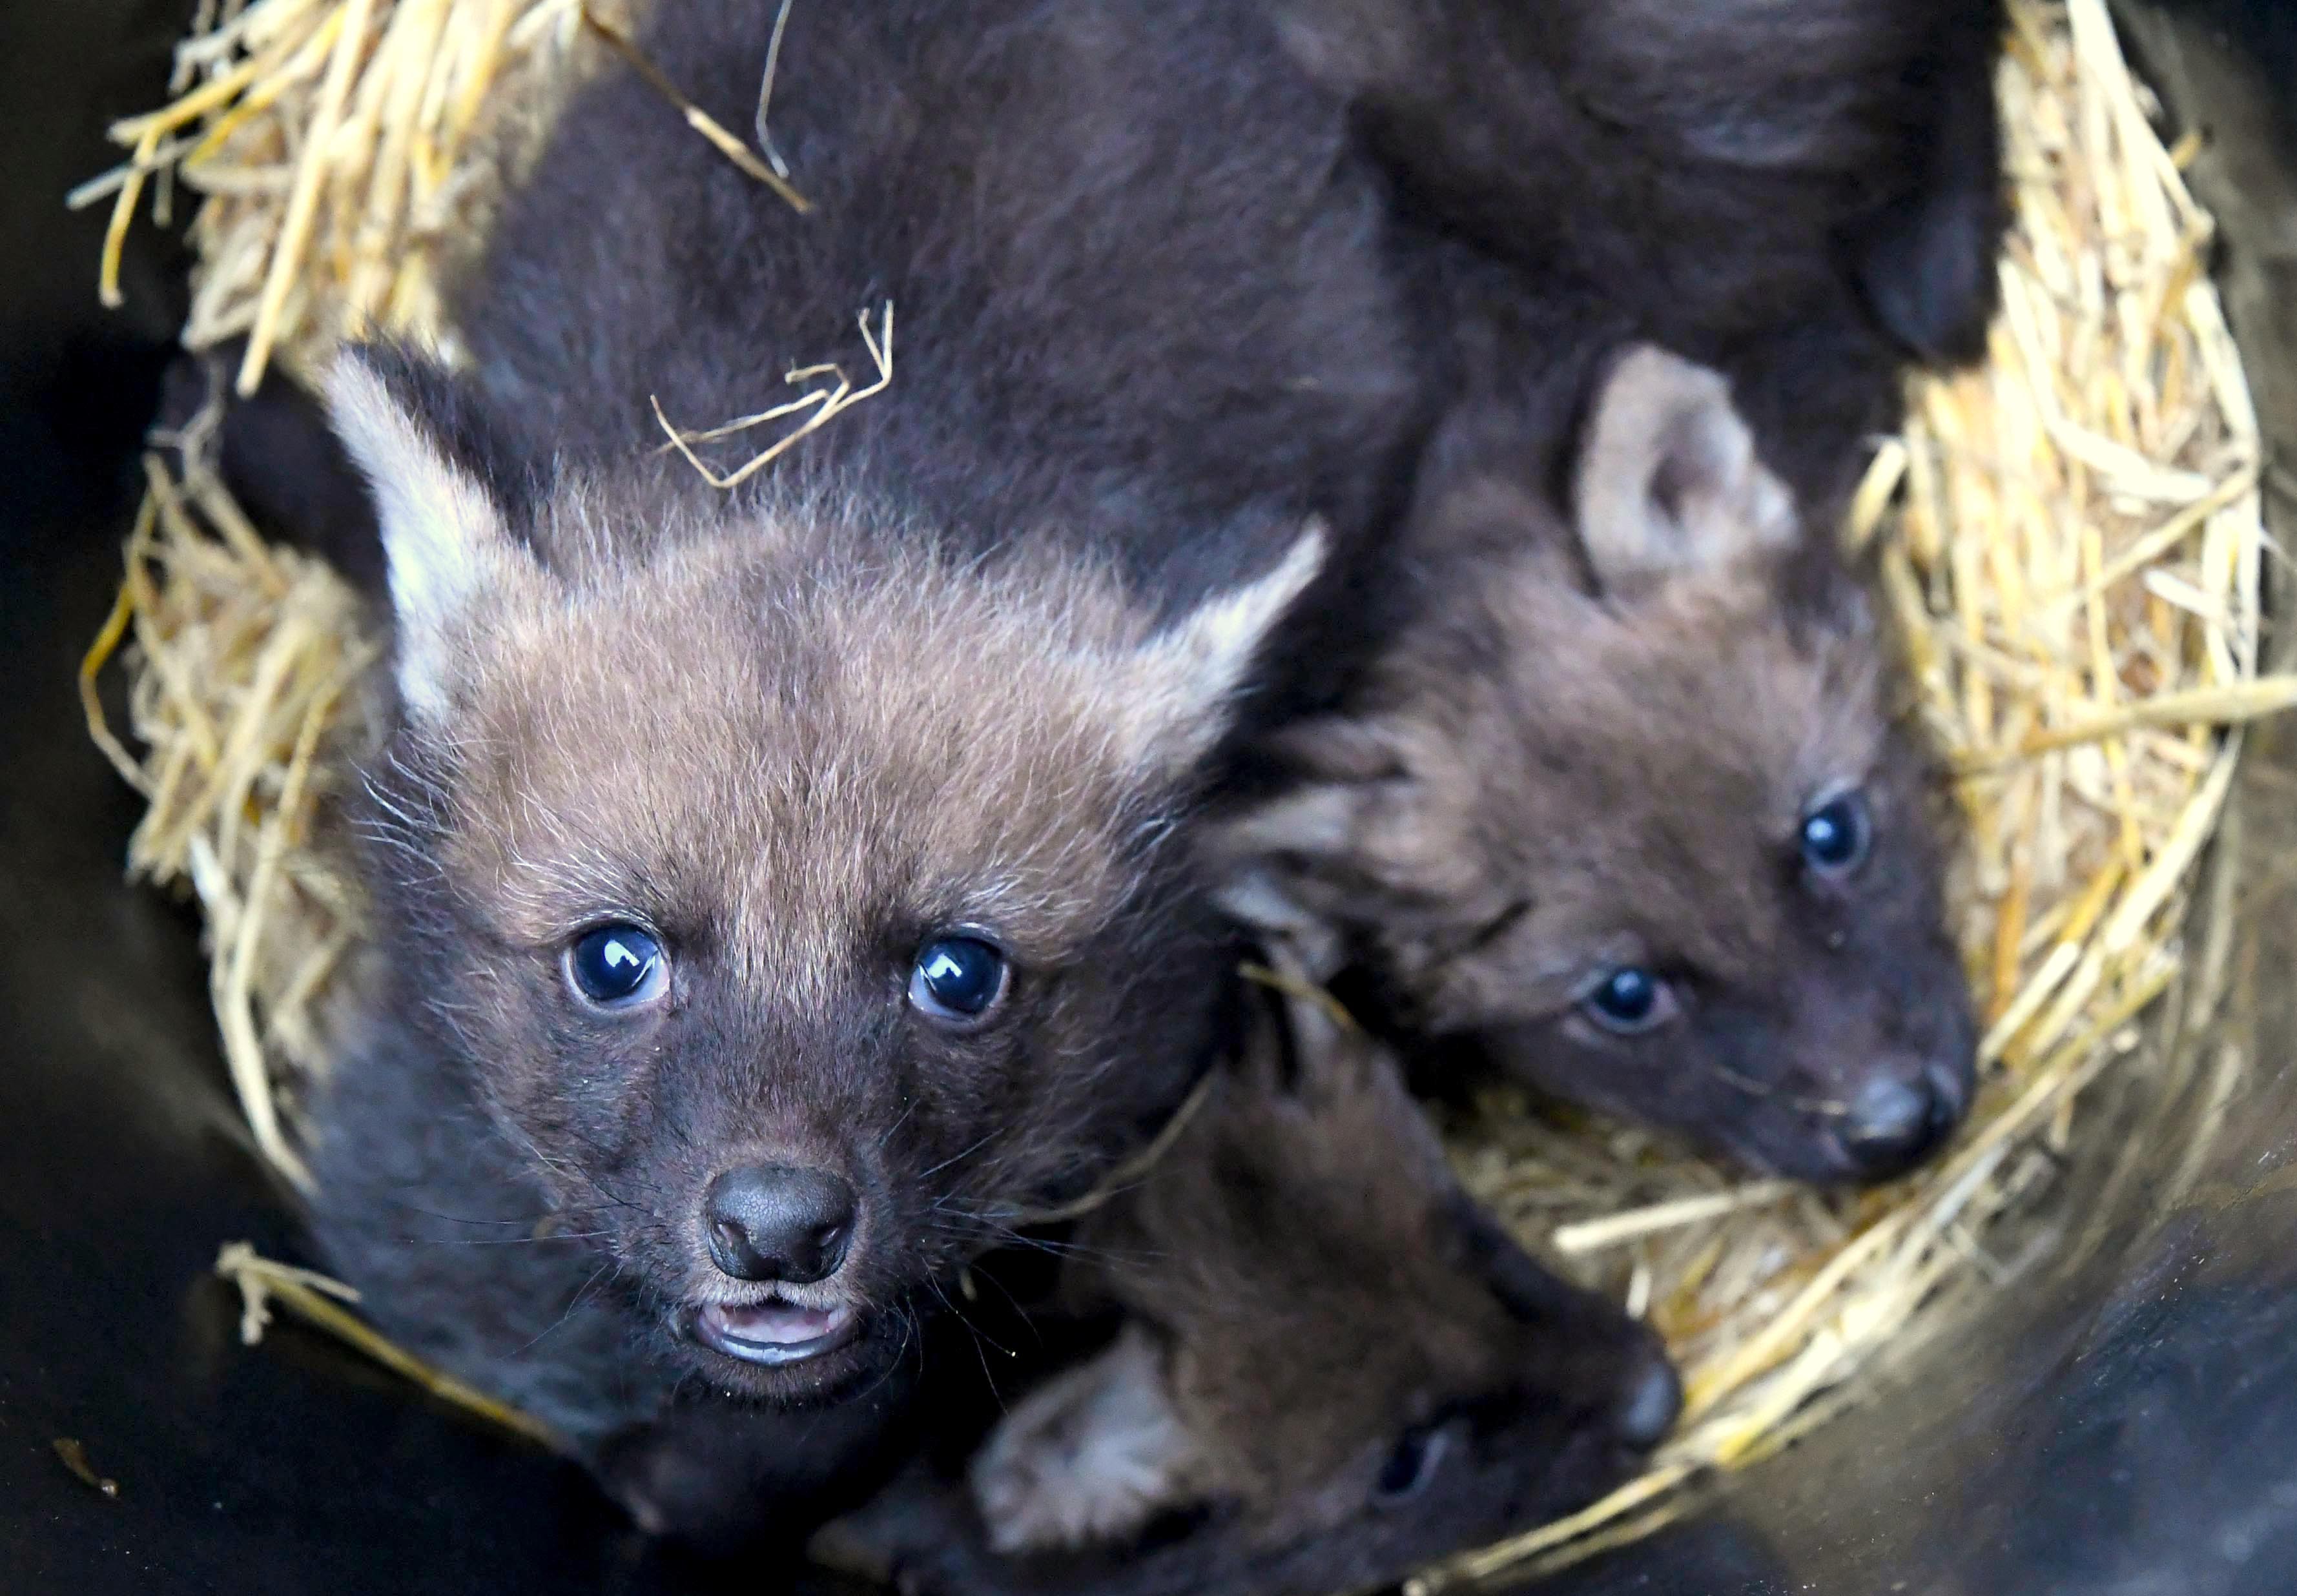 Maned Wolf cubs looking at the camera